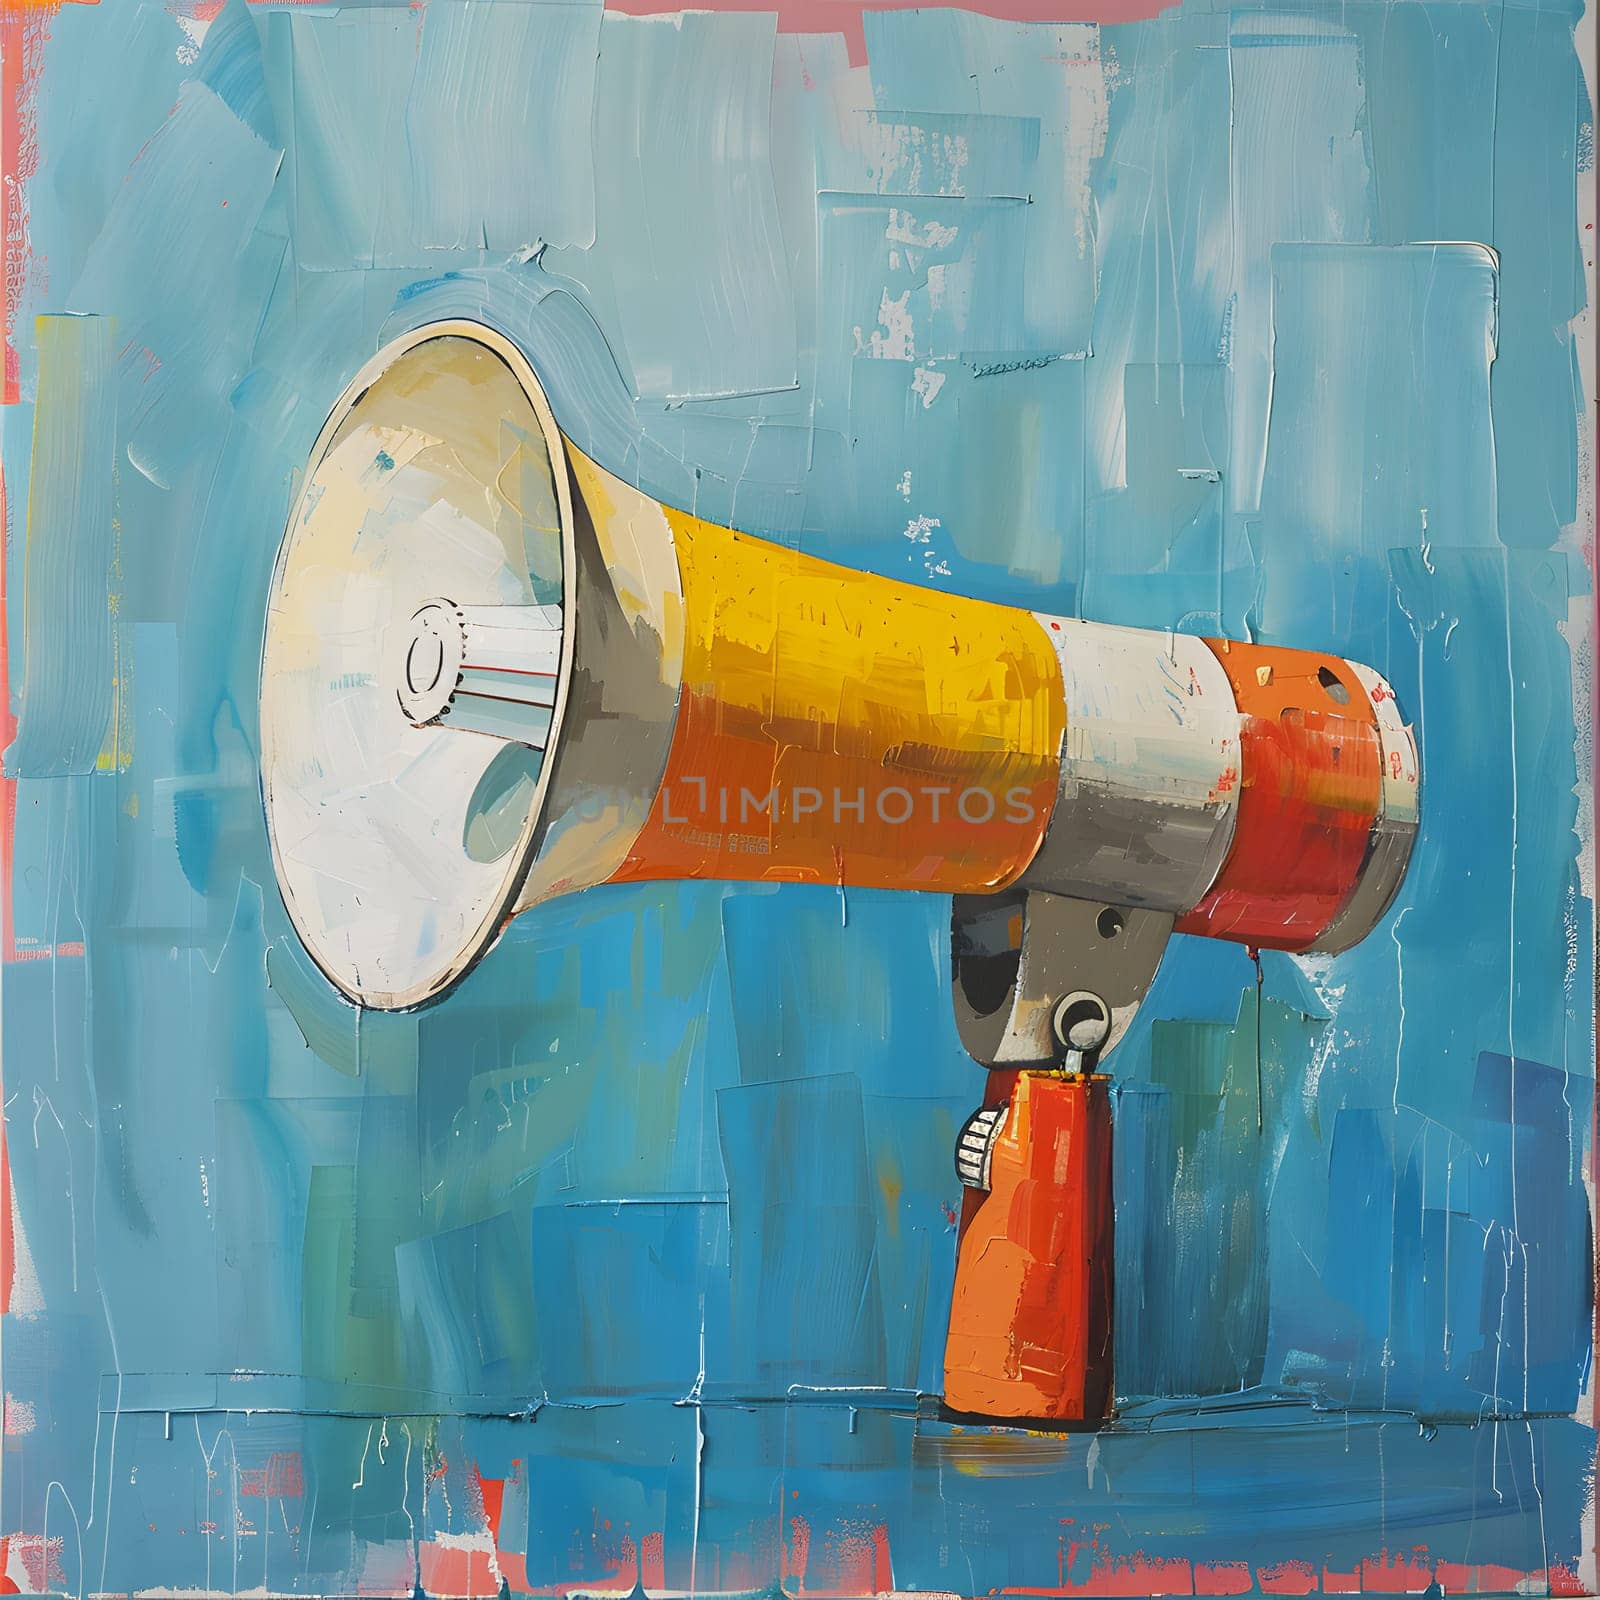 A fluid painting of a megaphone on a vibrant blue background, showcasing the artists creative vision through the use of color and illustration